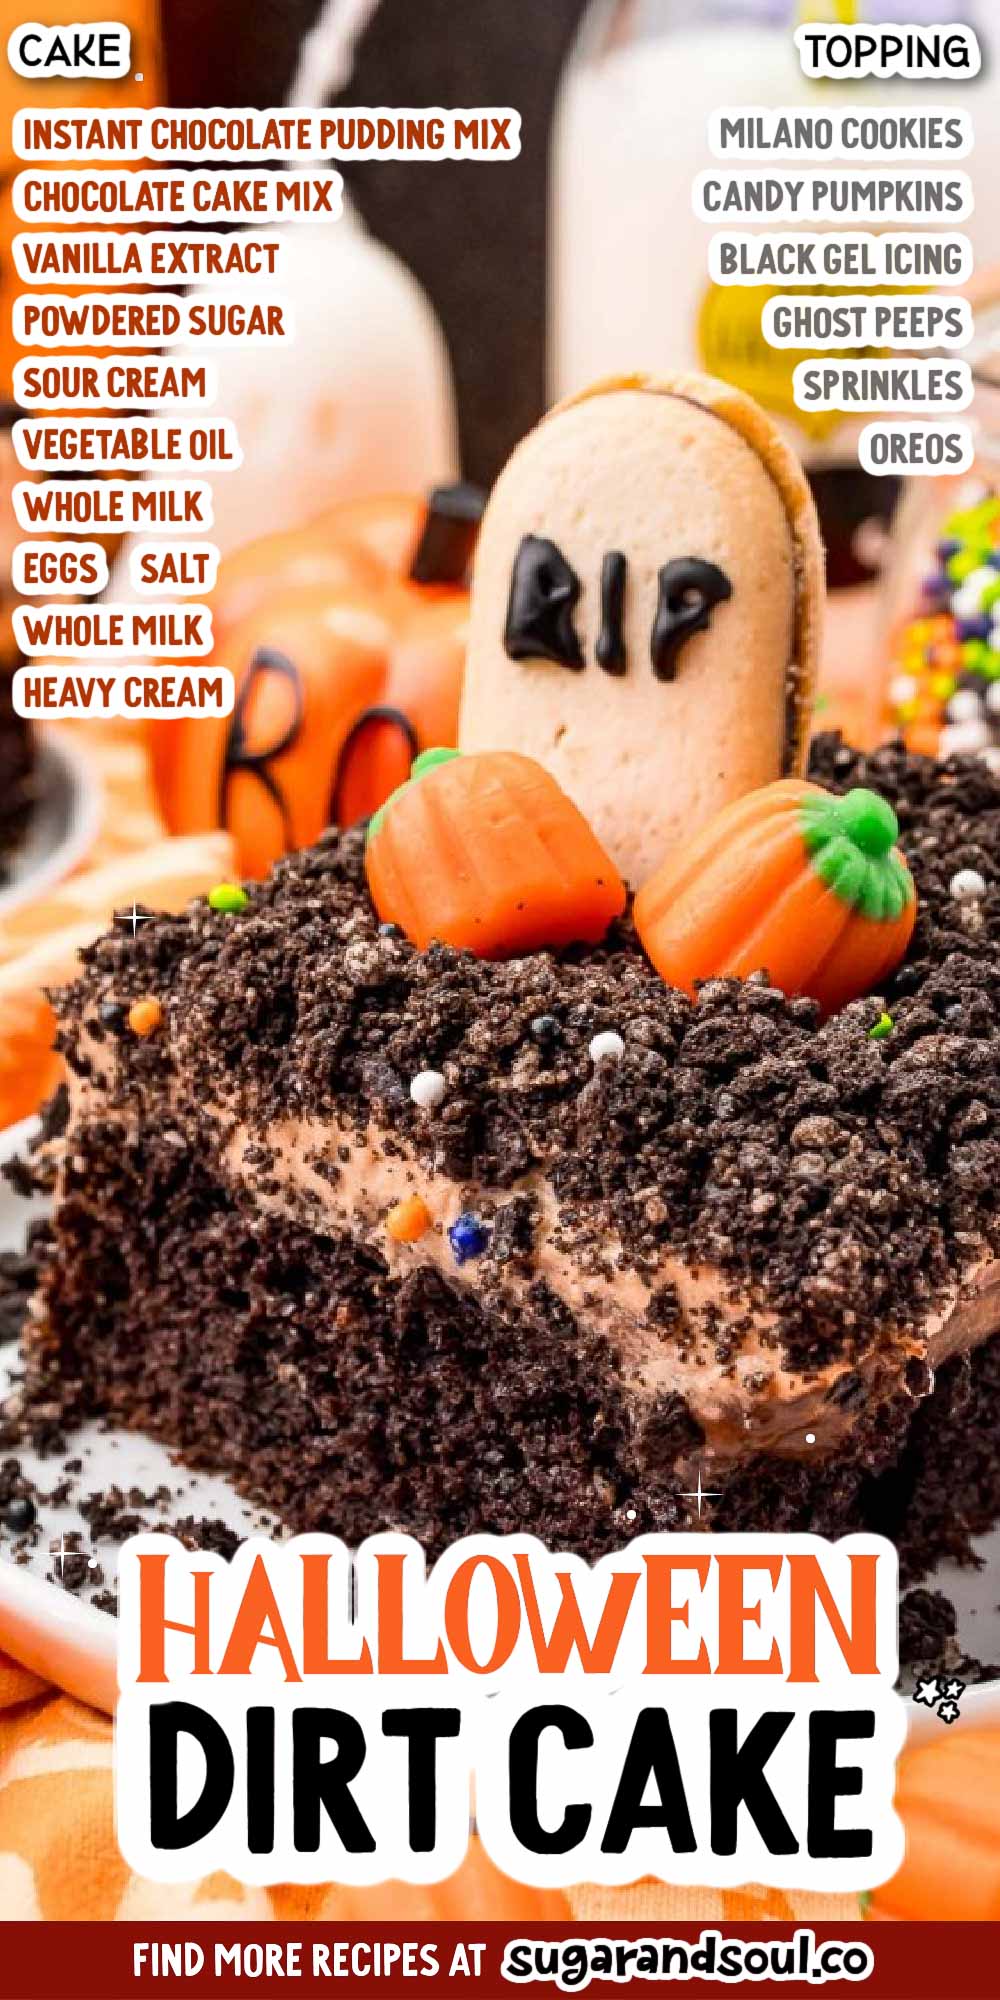 Halloween Dirt Cake layers chocolate pudding over a chocolate cake before being finished off with a 3-ingredient frosting and fun toppings! This festive cake will be an absolute hit at this year's Halloween Party! via @sugarandsoulco